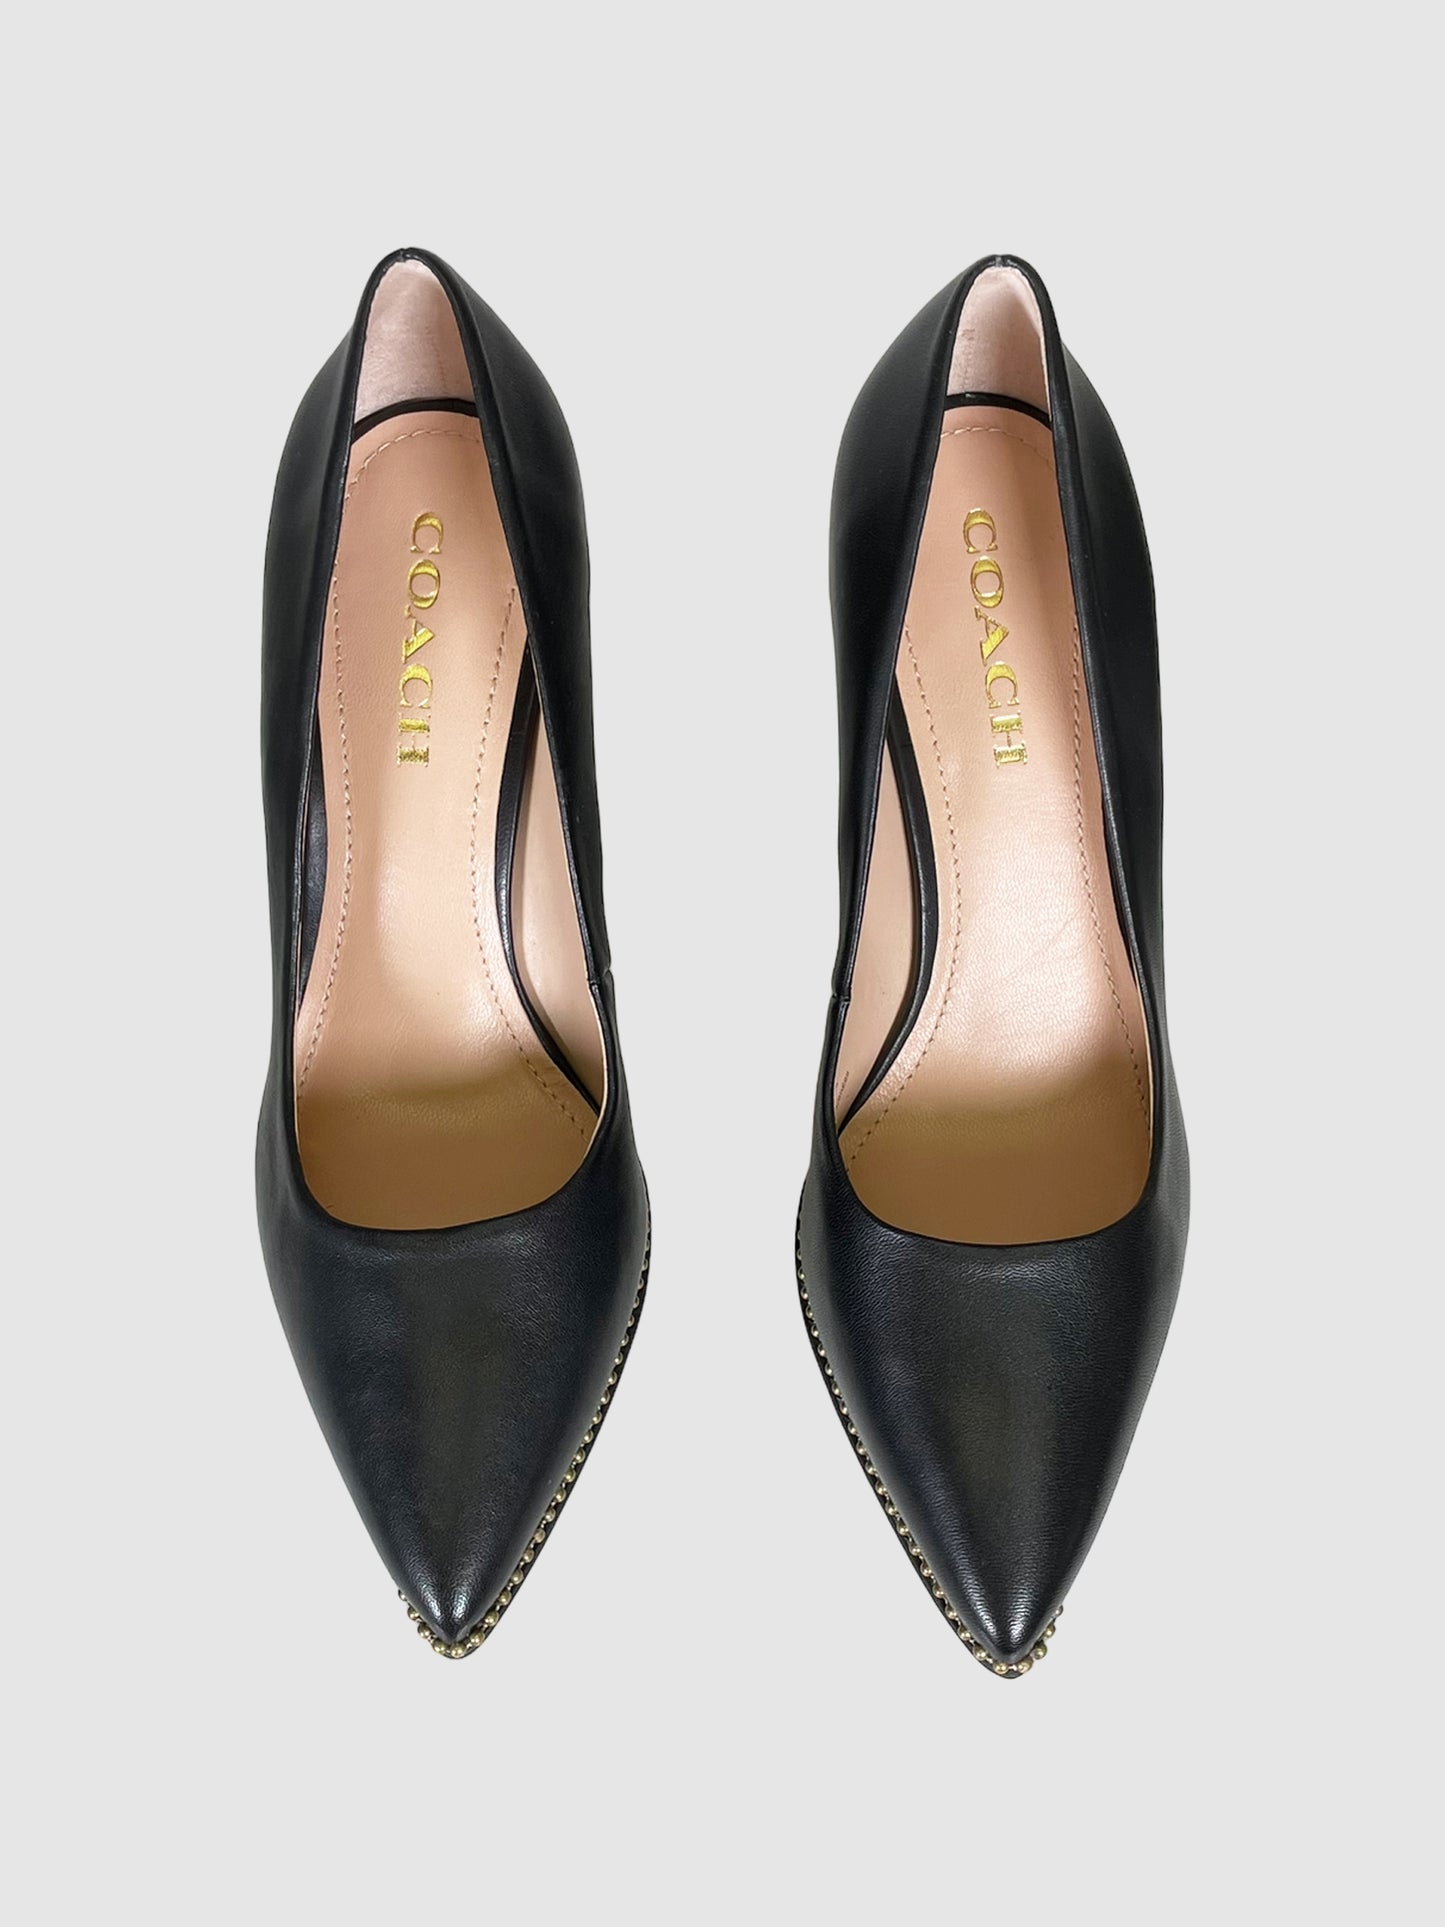 Pointed Toe Leather Pumps - Size 8.5